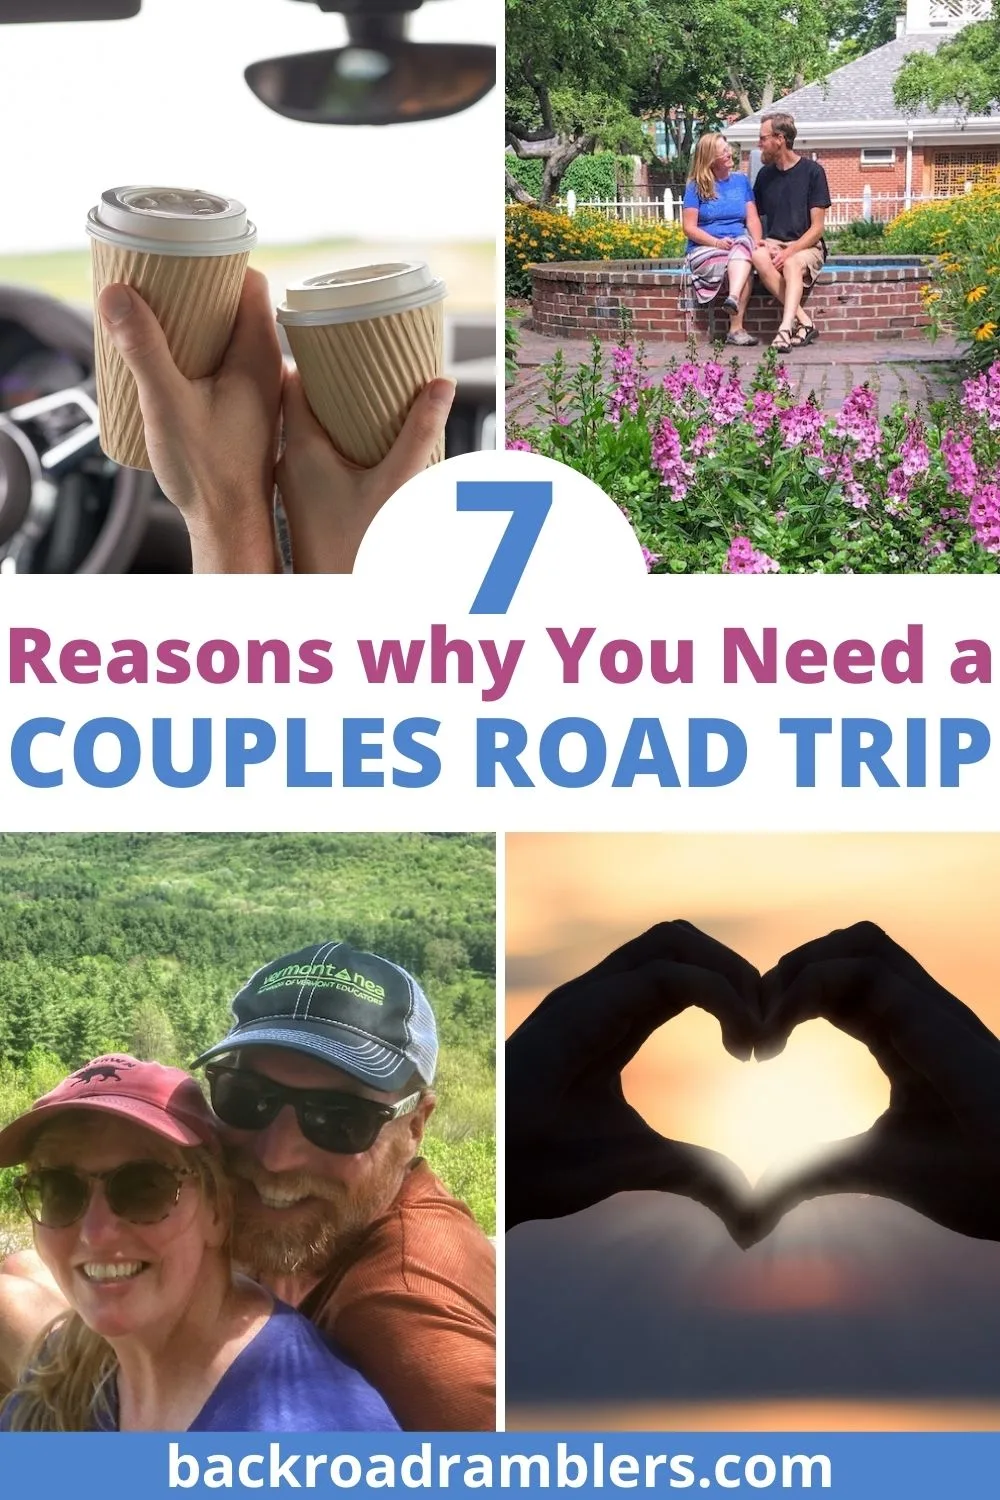 Four photos featuring different aspects of a couples road trip. Text overlay: 7 Reasons why you need a couples road trip.